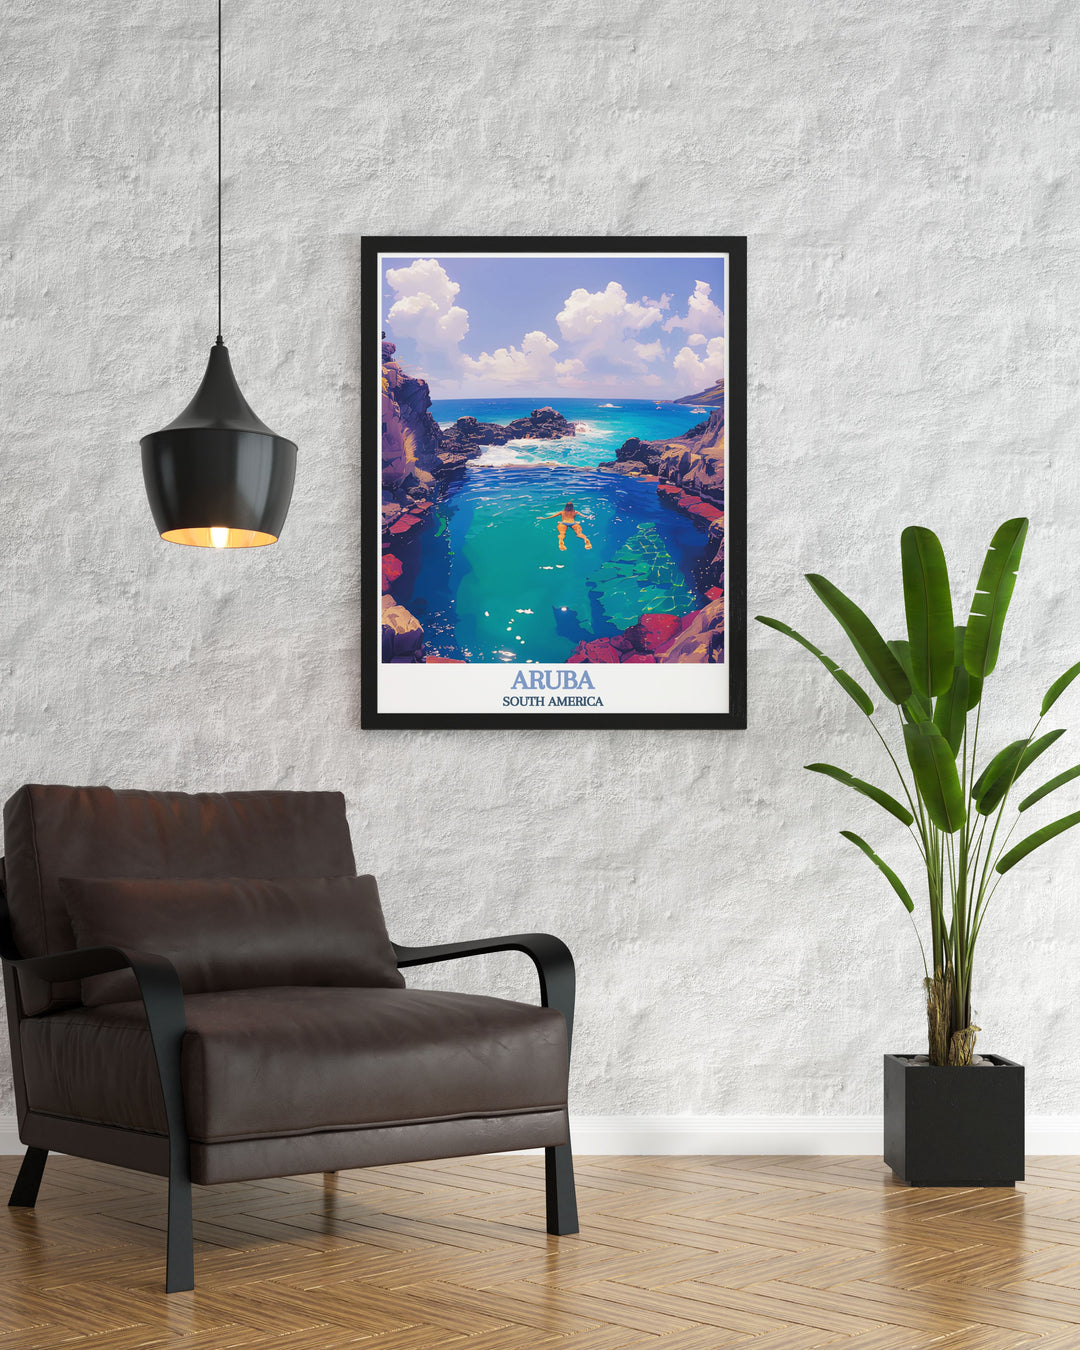 Aruba poster depicting the natural wonder of the Natural Pool bringing the essence of the Caribbean island into your home and serving as a beautiful reminder of your travels or love for nature with its exquisite fine line print quality